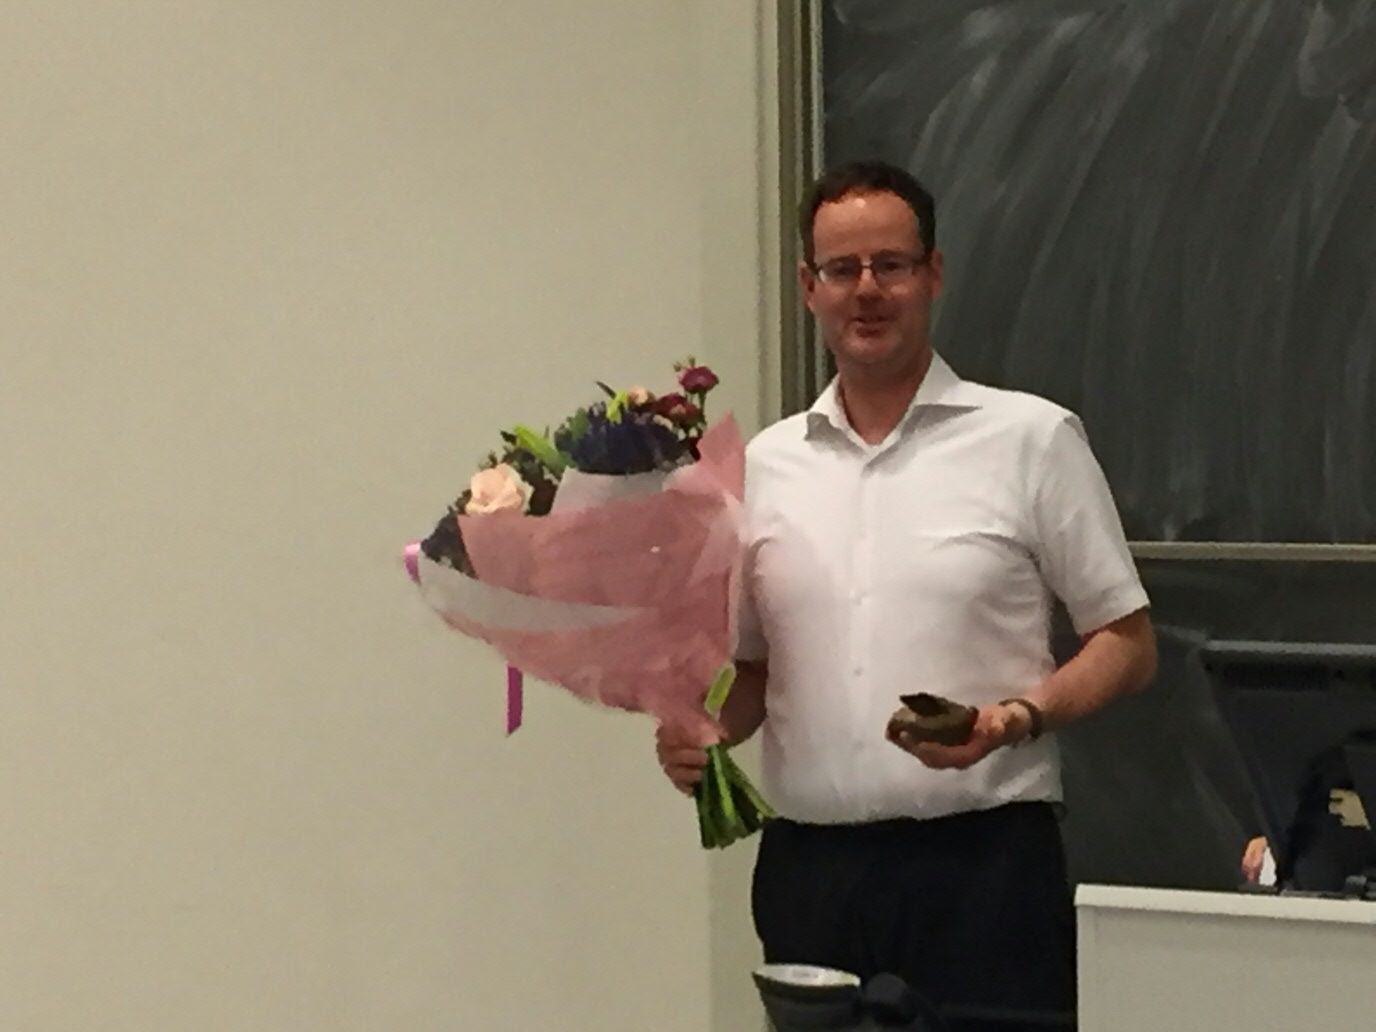 Jan-Anton with award and flowers